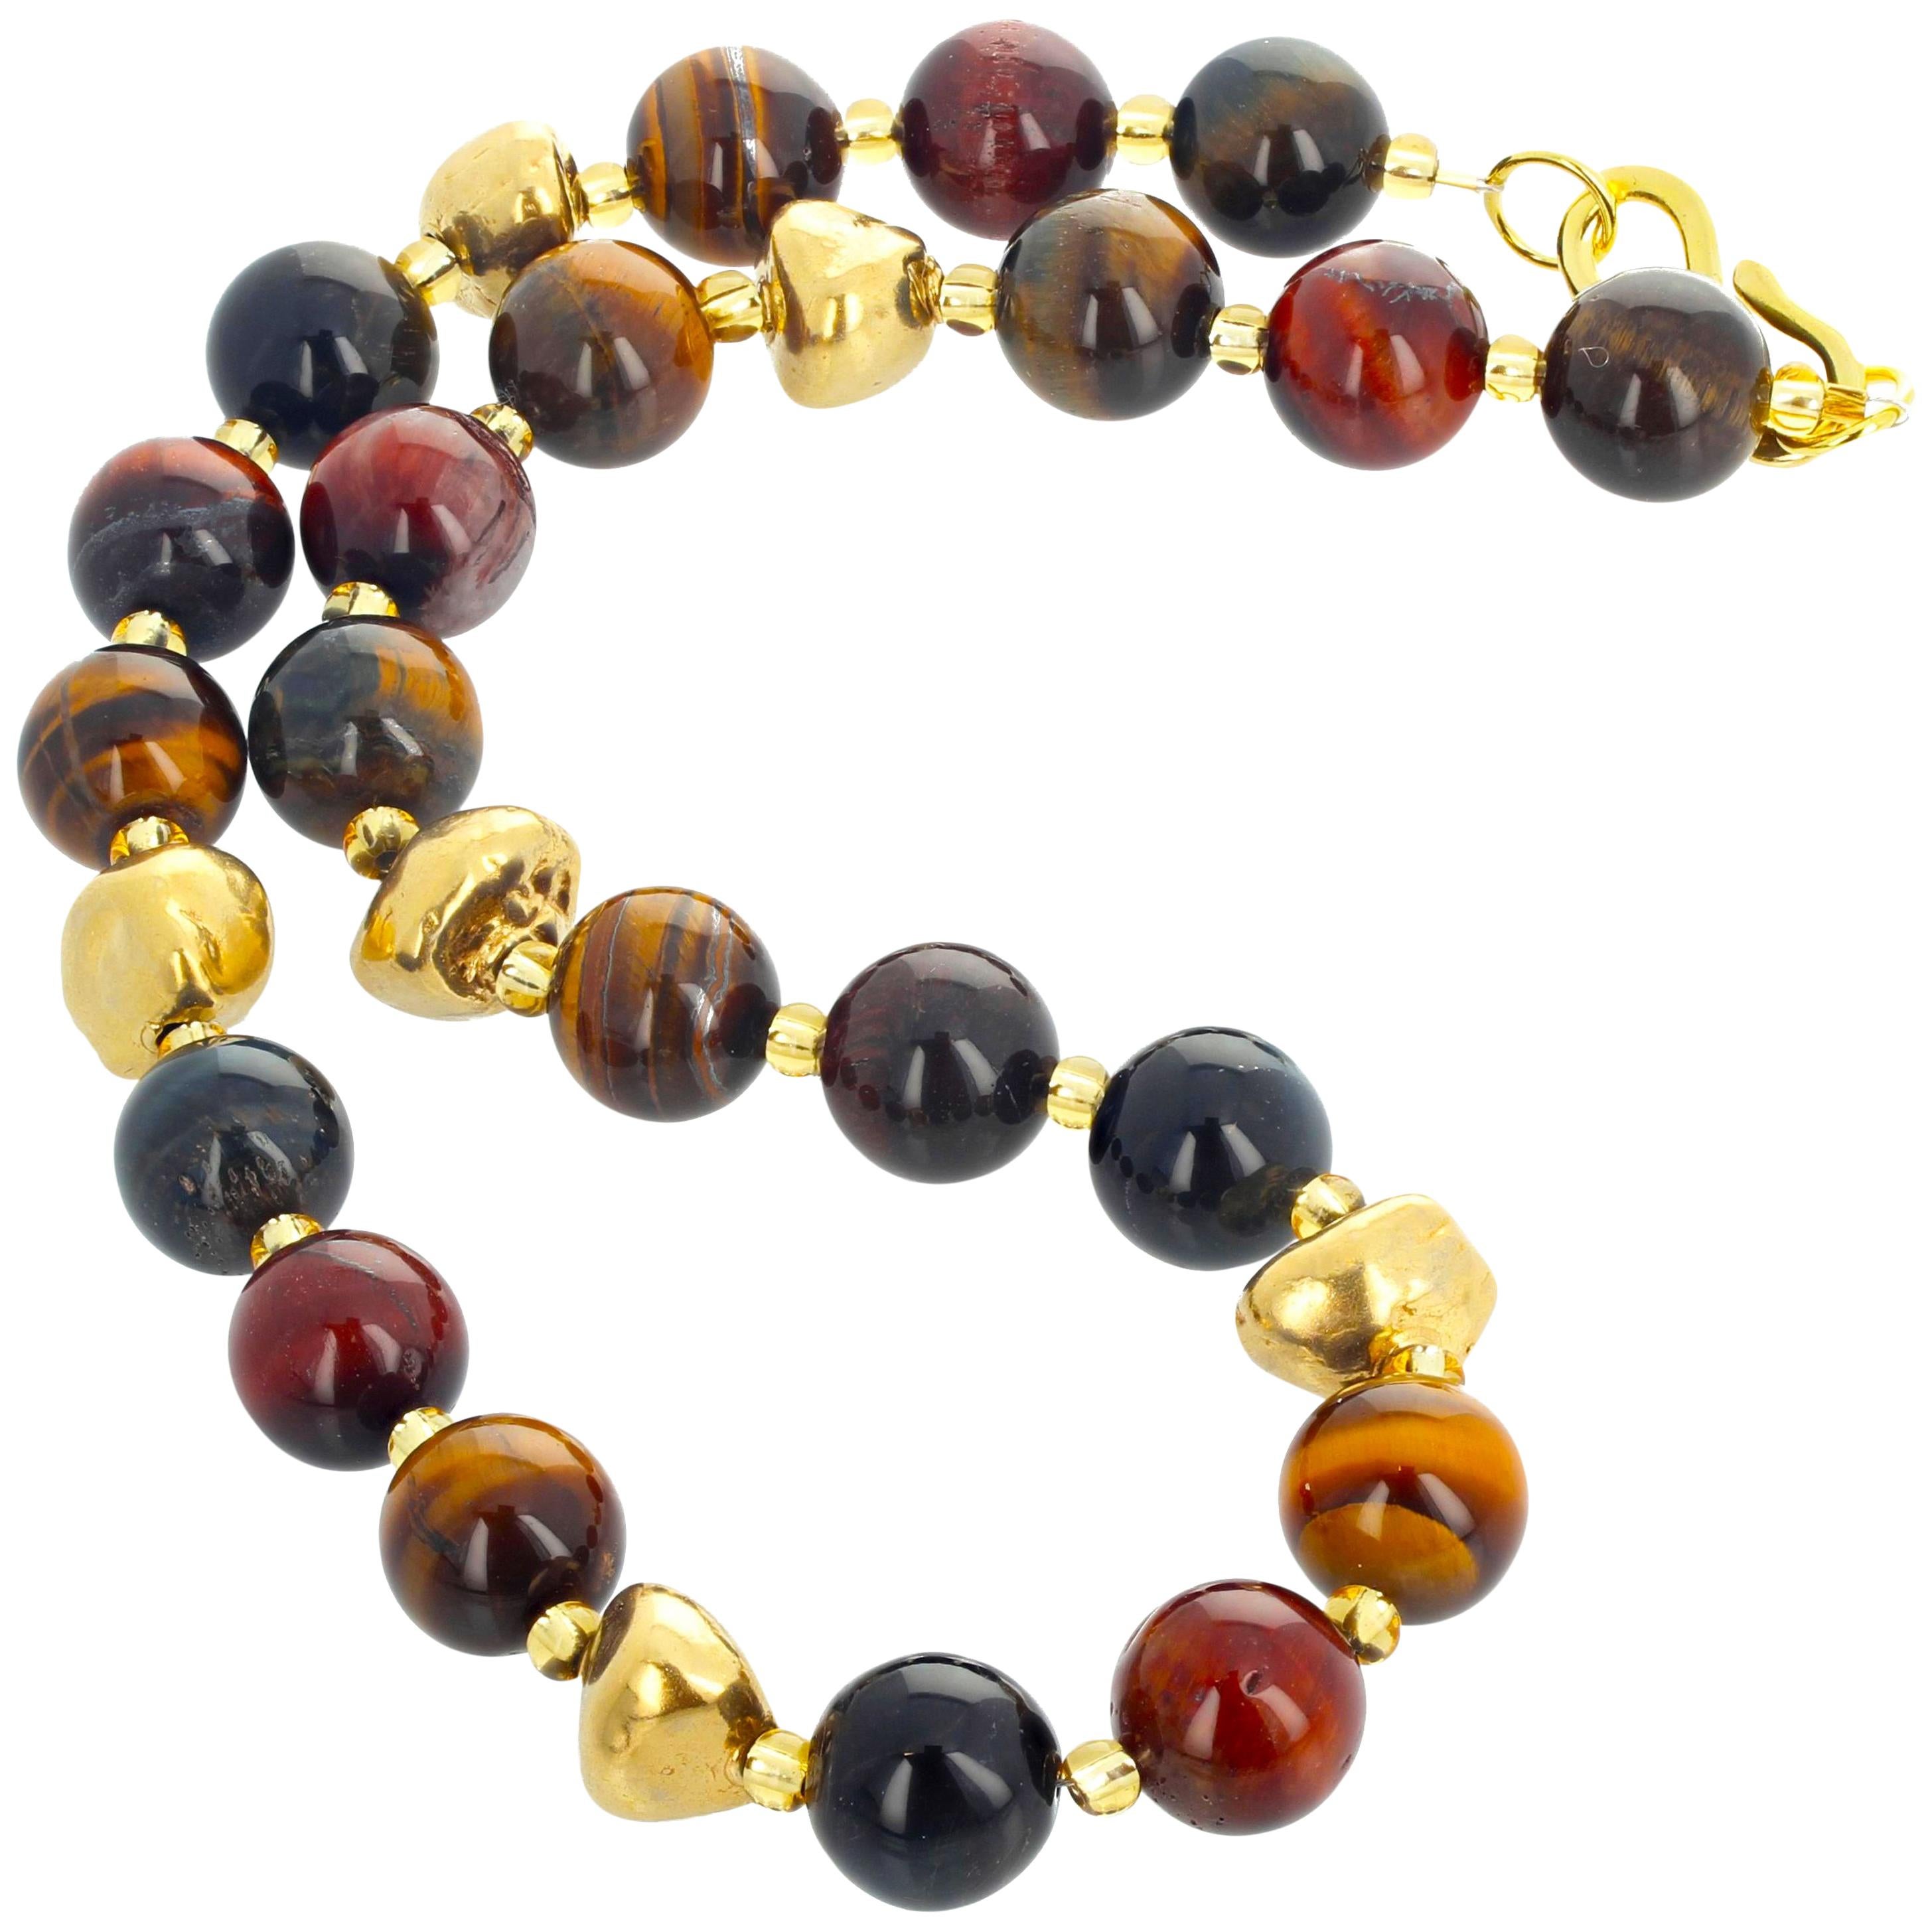 Glowing natural highly polished Tiger eye gemstones enhanced with gold plated nuggets and accented with brilliant crystals set in a 19 inch long necklace with gold plated clasp. The Tiger Eye are approximately 12mm.  